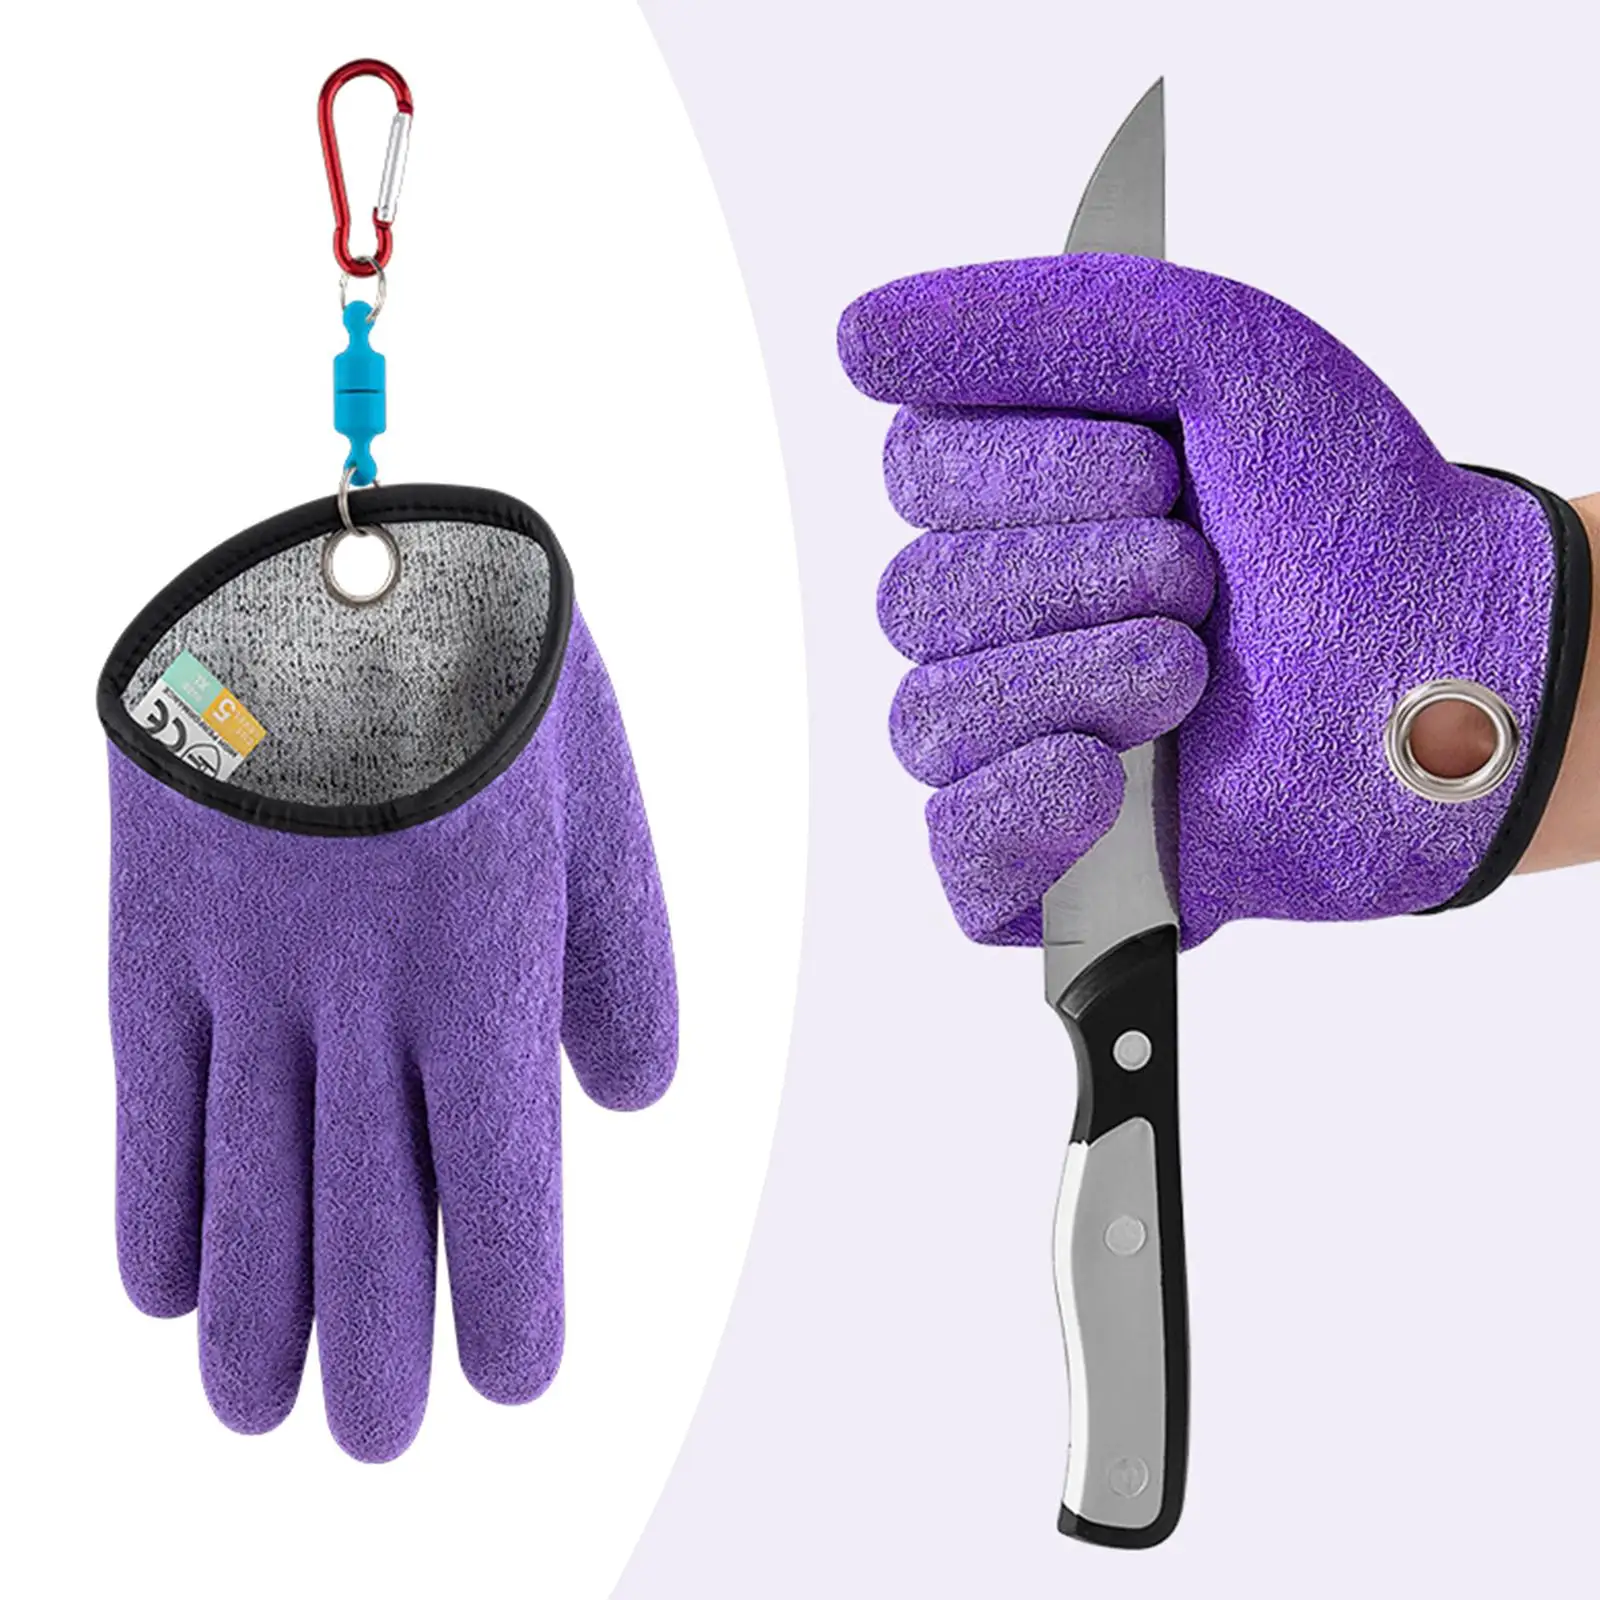 Fishing Puncture Proof Gloves with Magnet Release Waterproof Fish Glove